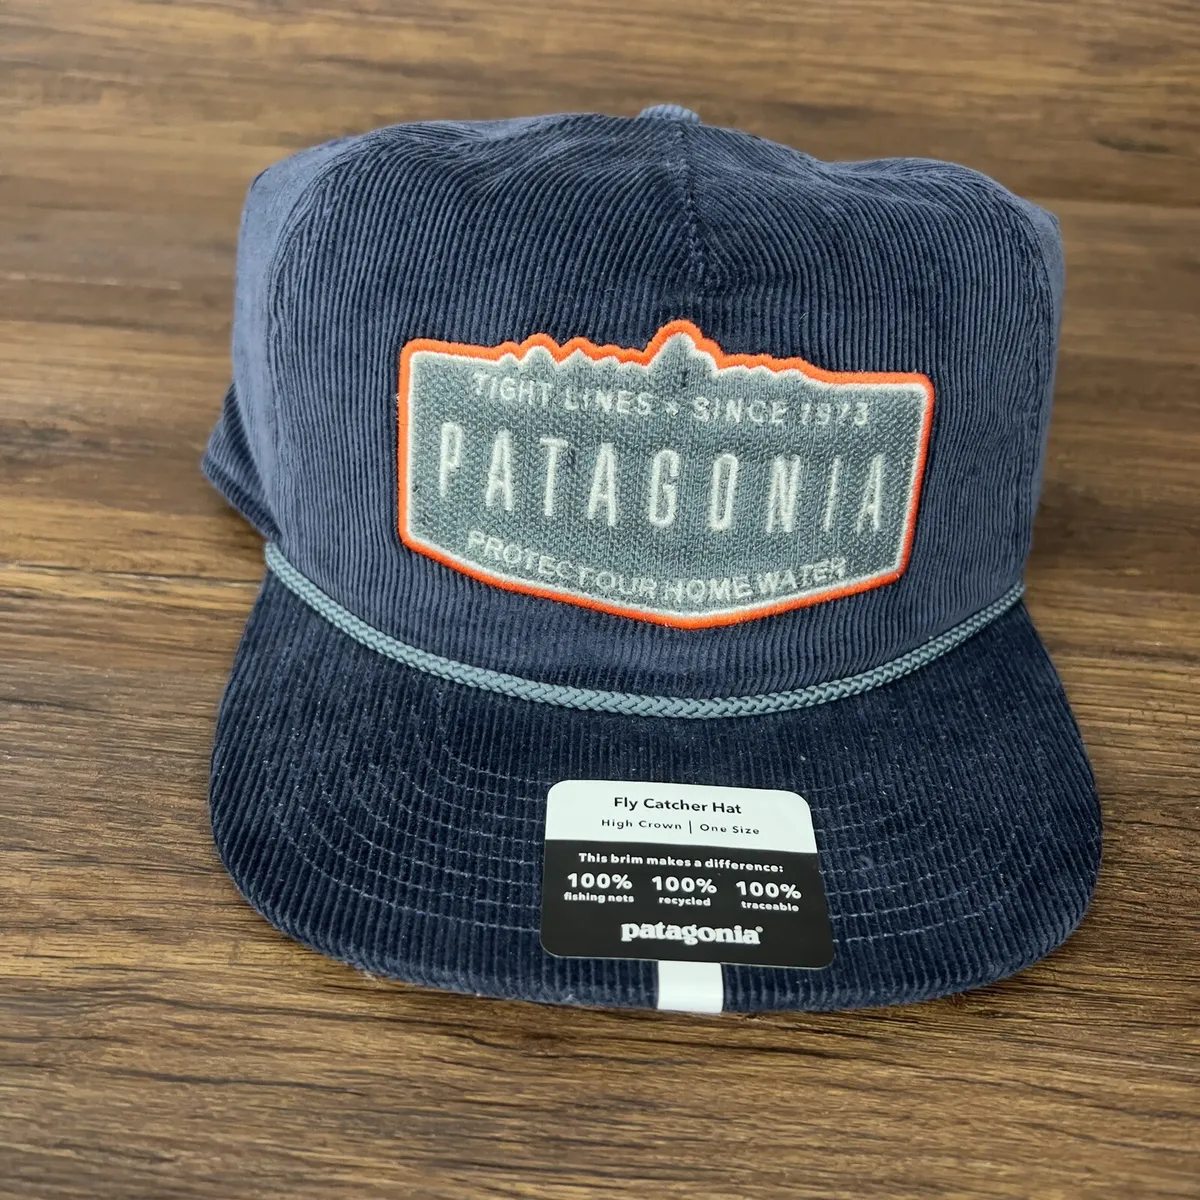 Patagonia Fly Catcher Hat - New With Tags - Ridgecrest: New Navy